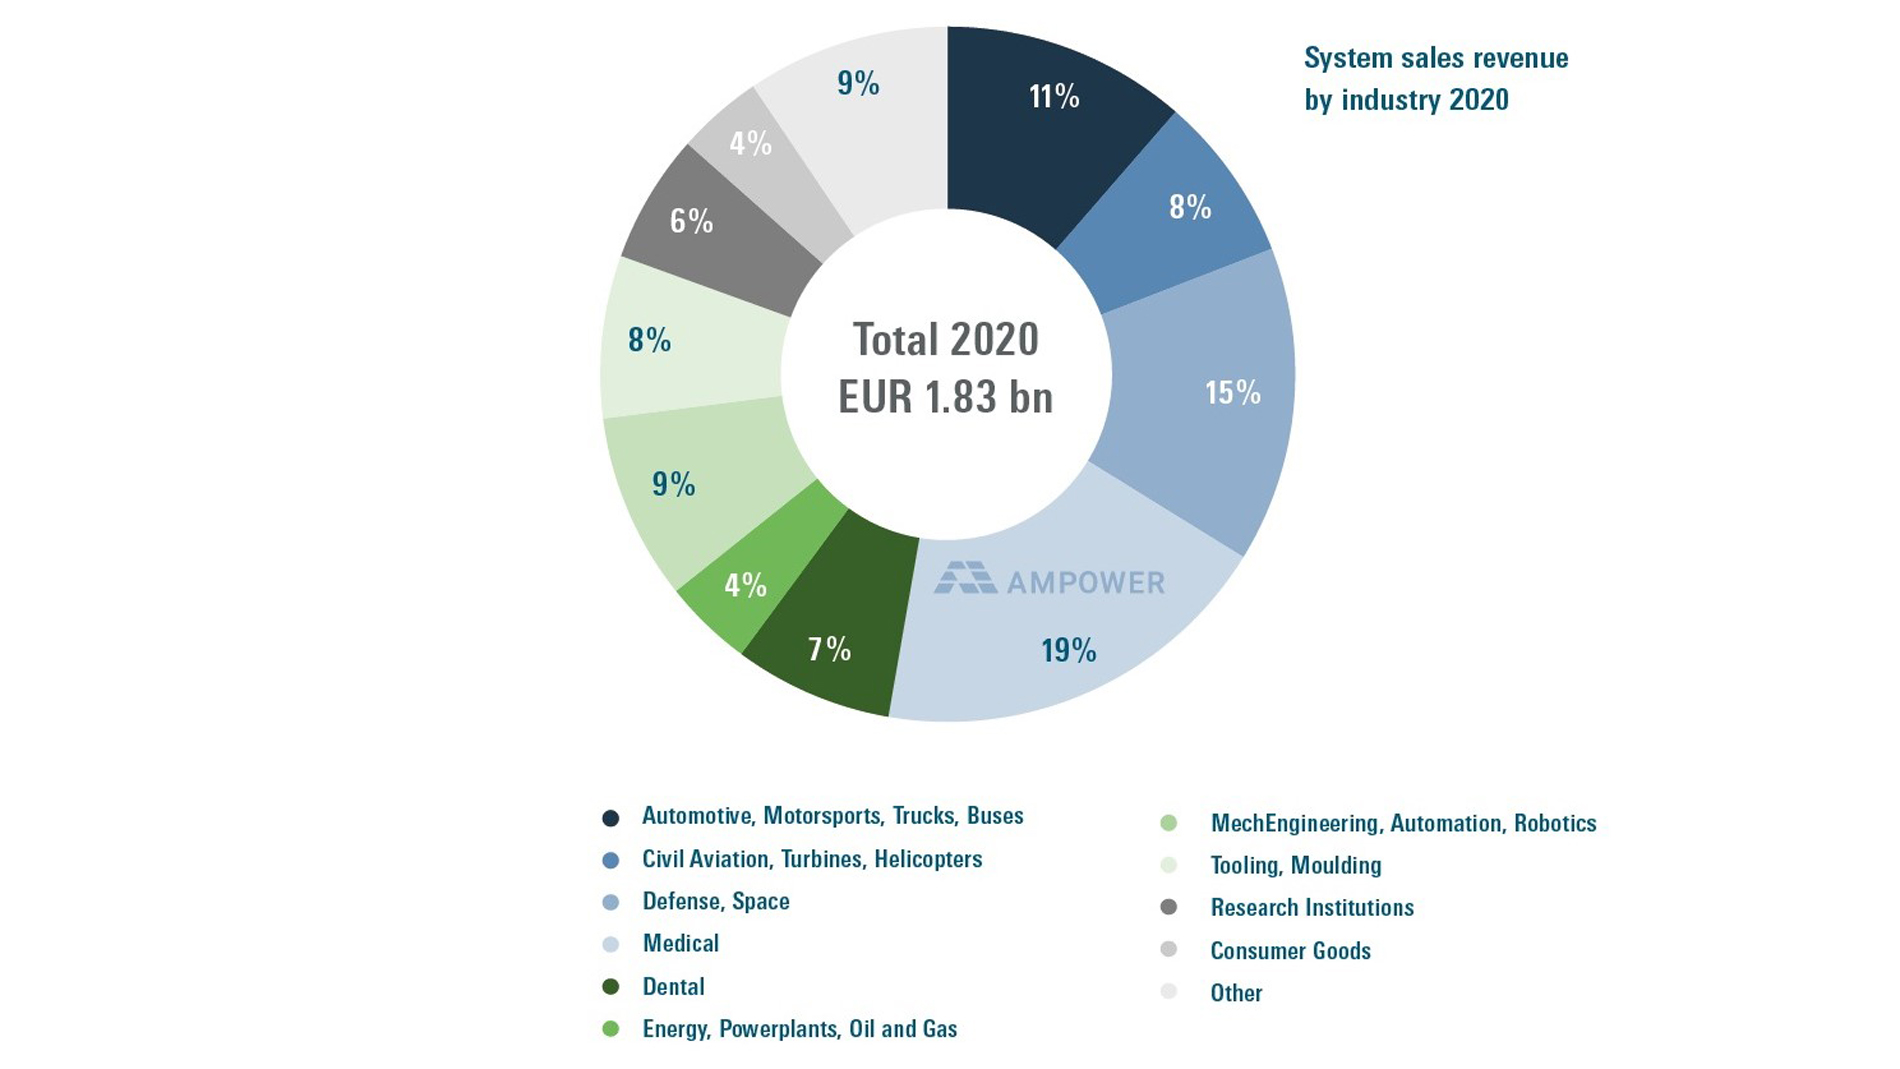 System sales revenue by industry 2020. Infographic: additive-manufacturing-report.com © Copyright 2021, AMPOWER GmbH & Co. KG